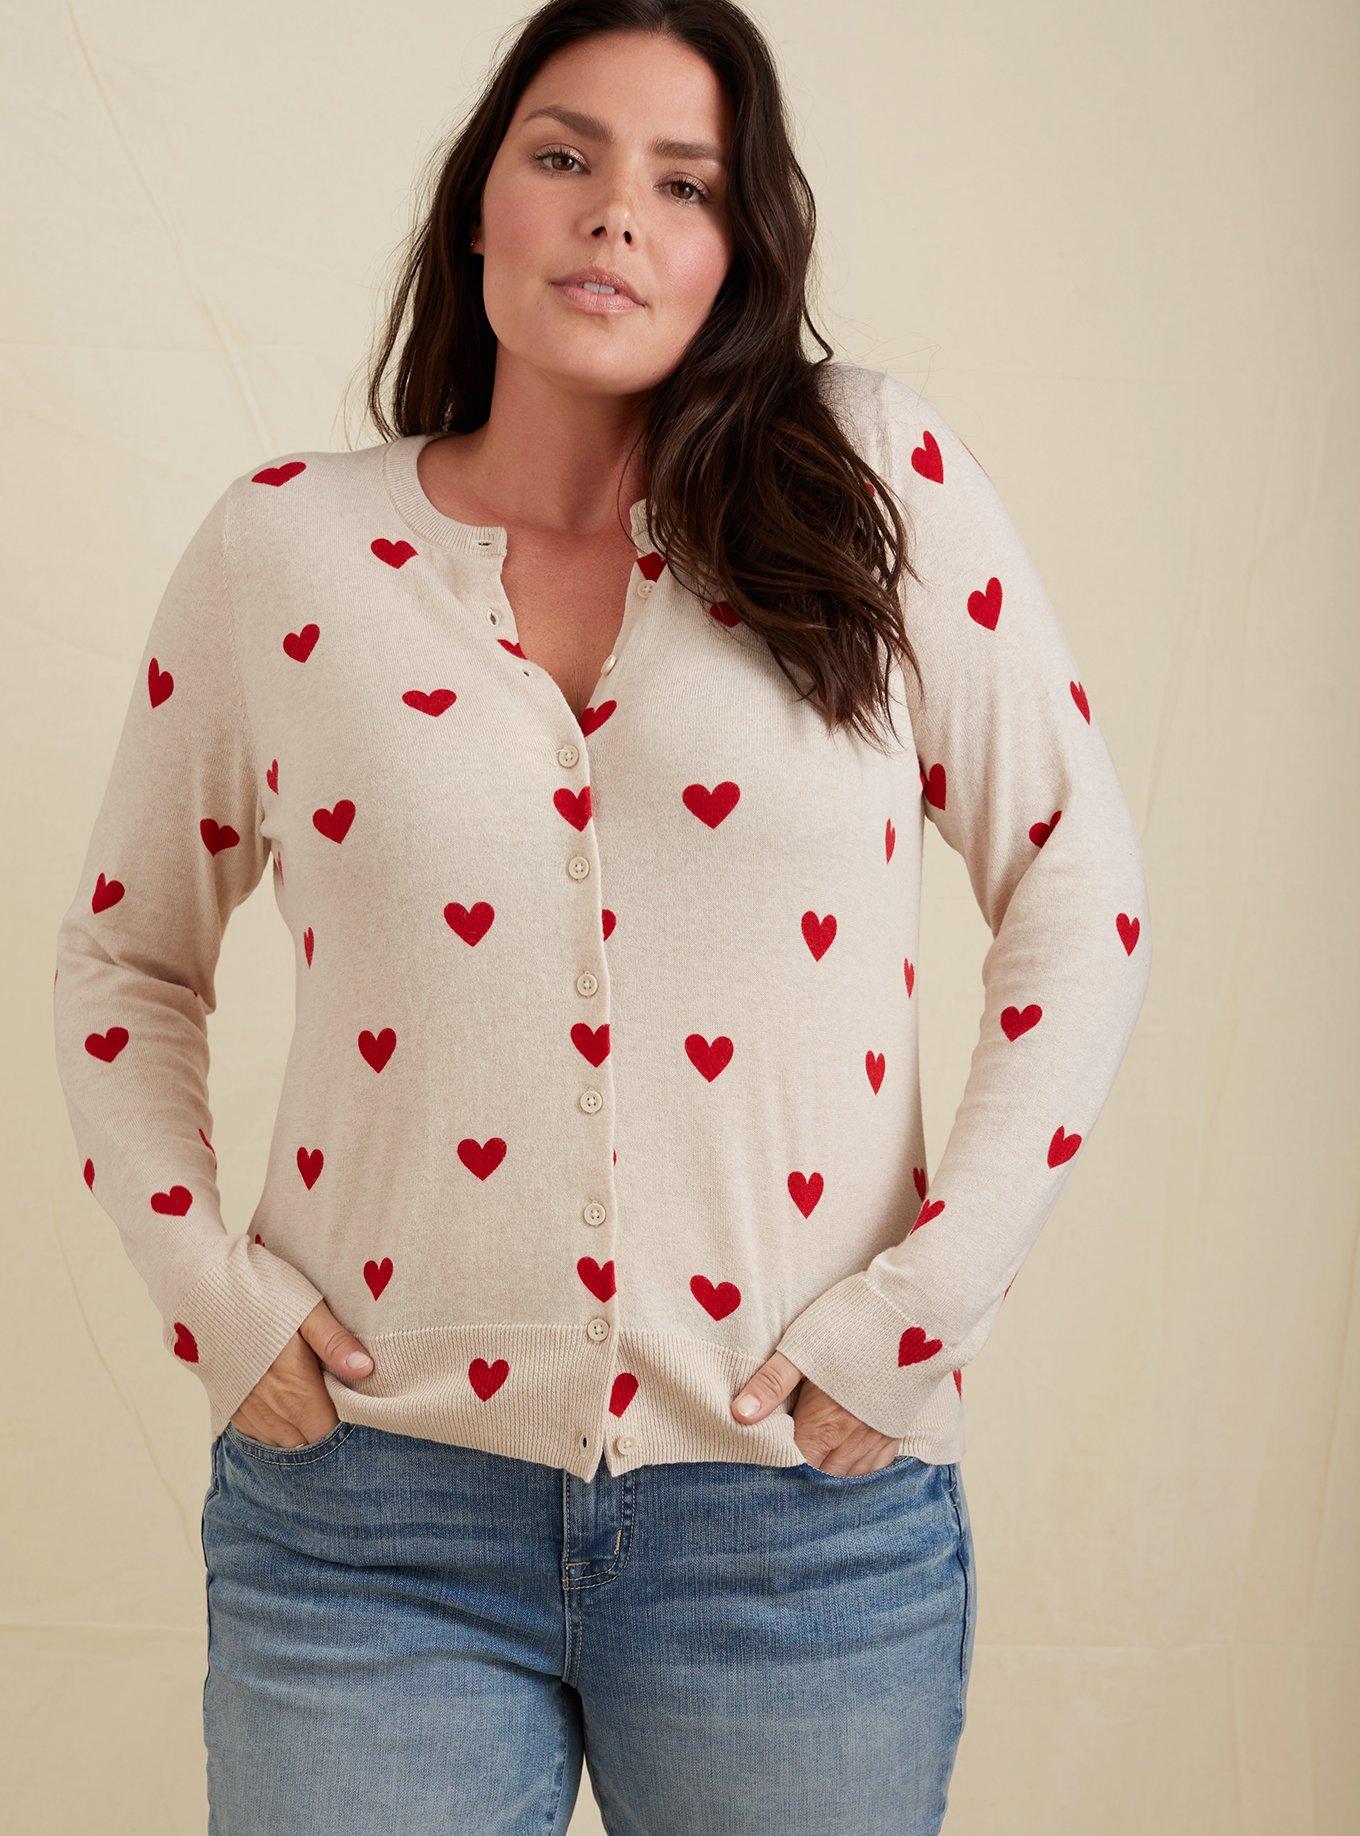 Plus Size - Cardigan Button-Front Classic Sweater - Torrid